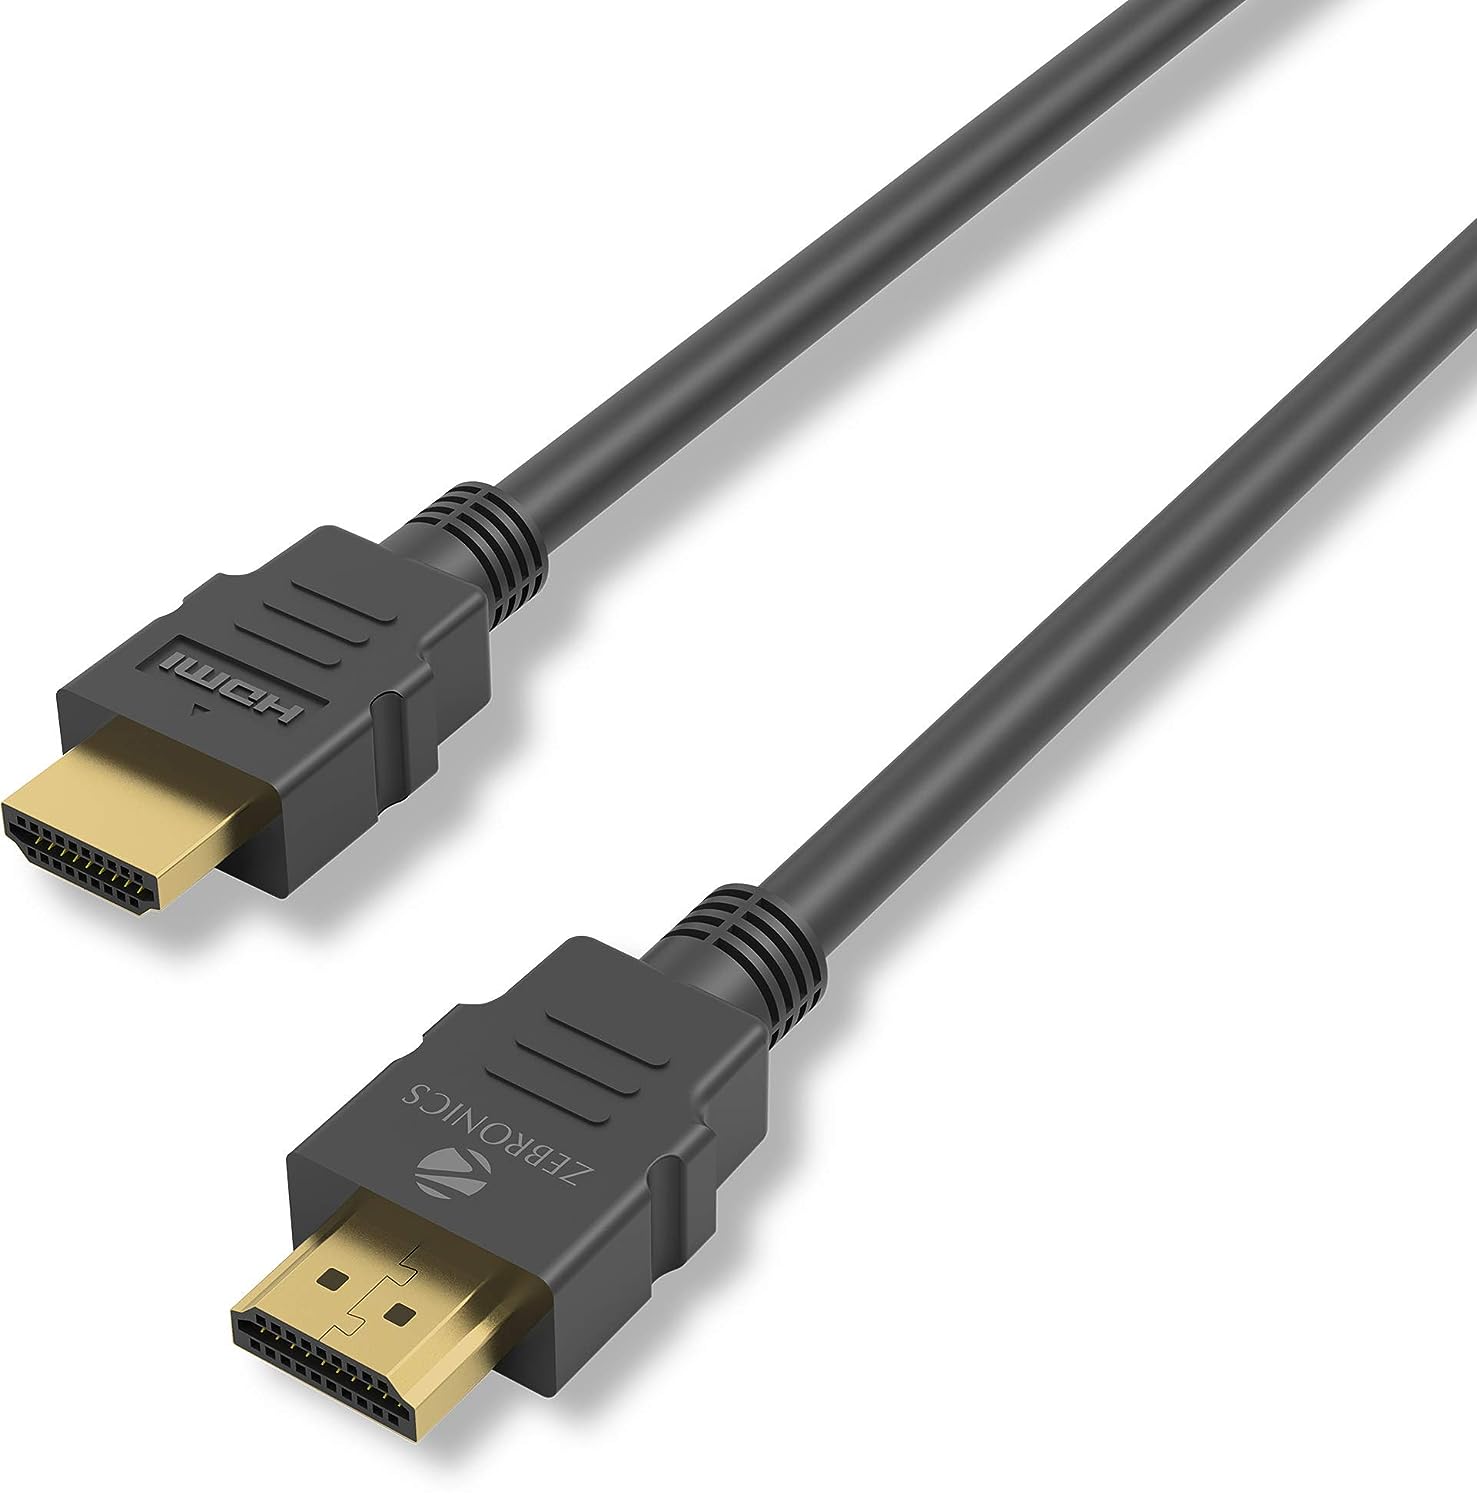 Zebronics Zeb-HAA1520 (1.5 Meter) HDMI Cable Supports 3D, 4K, ARC & CEC Extension, Compatible with HDMI-Enabled TV, Blu-ray, Playstation (Gold Plated Connectors)